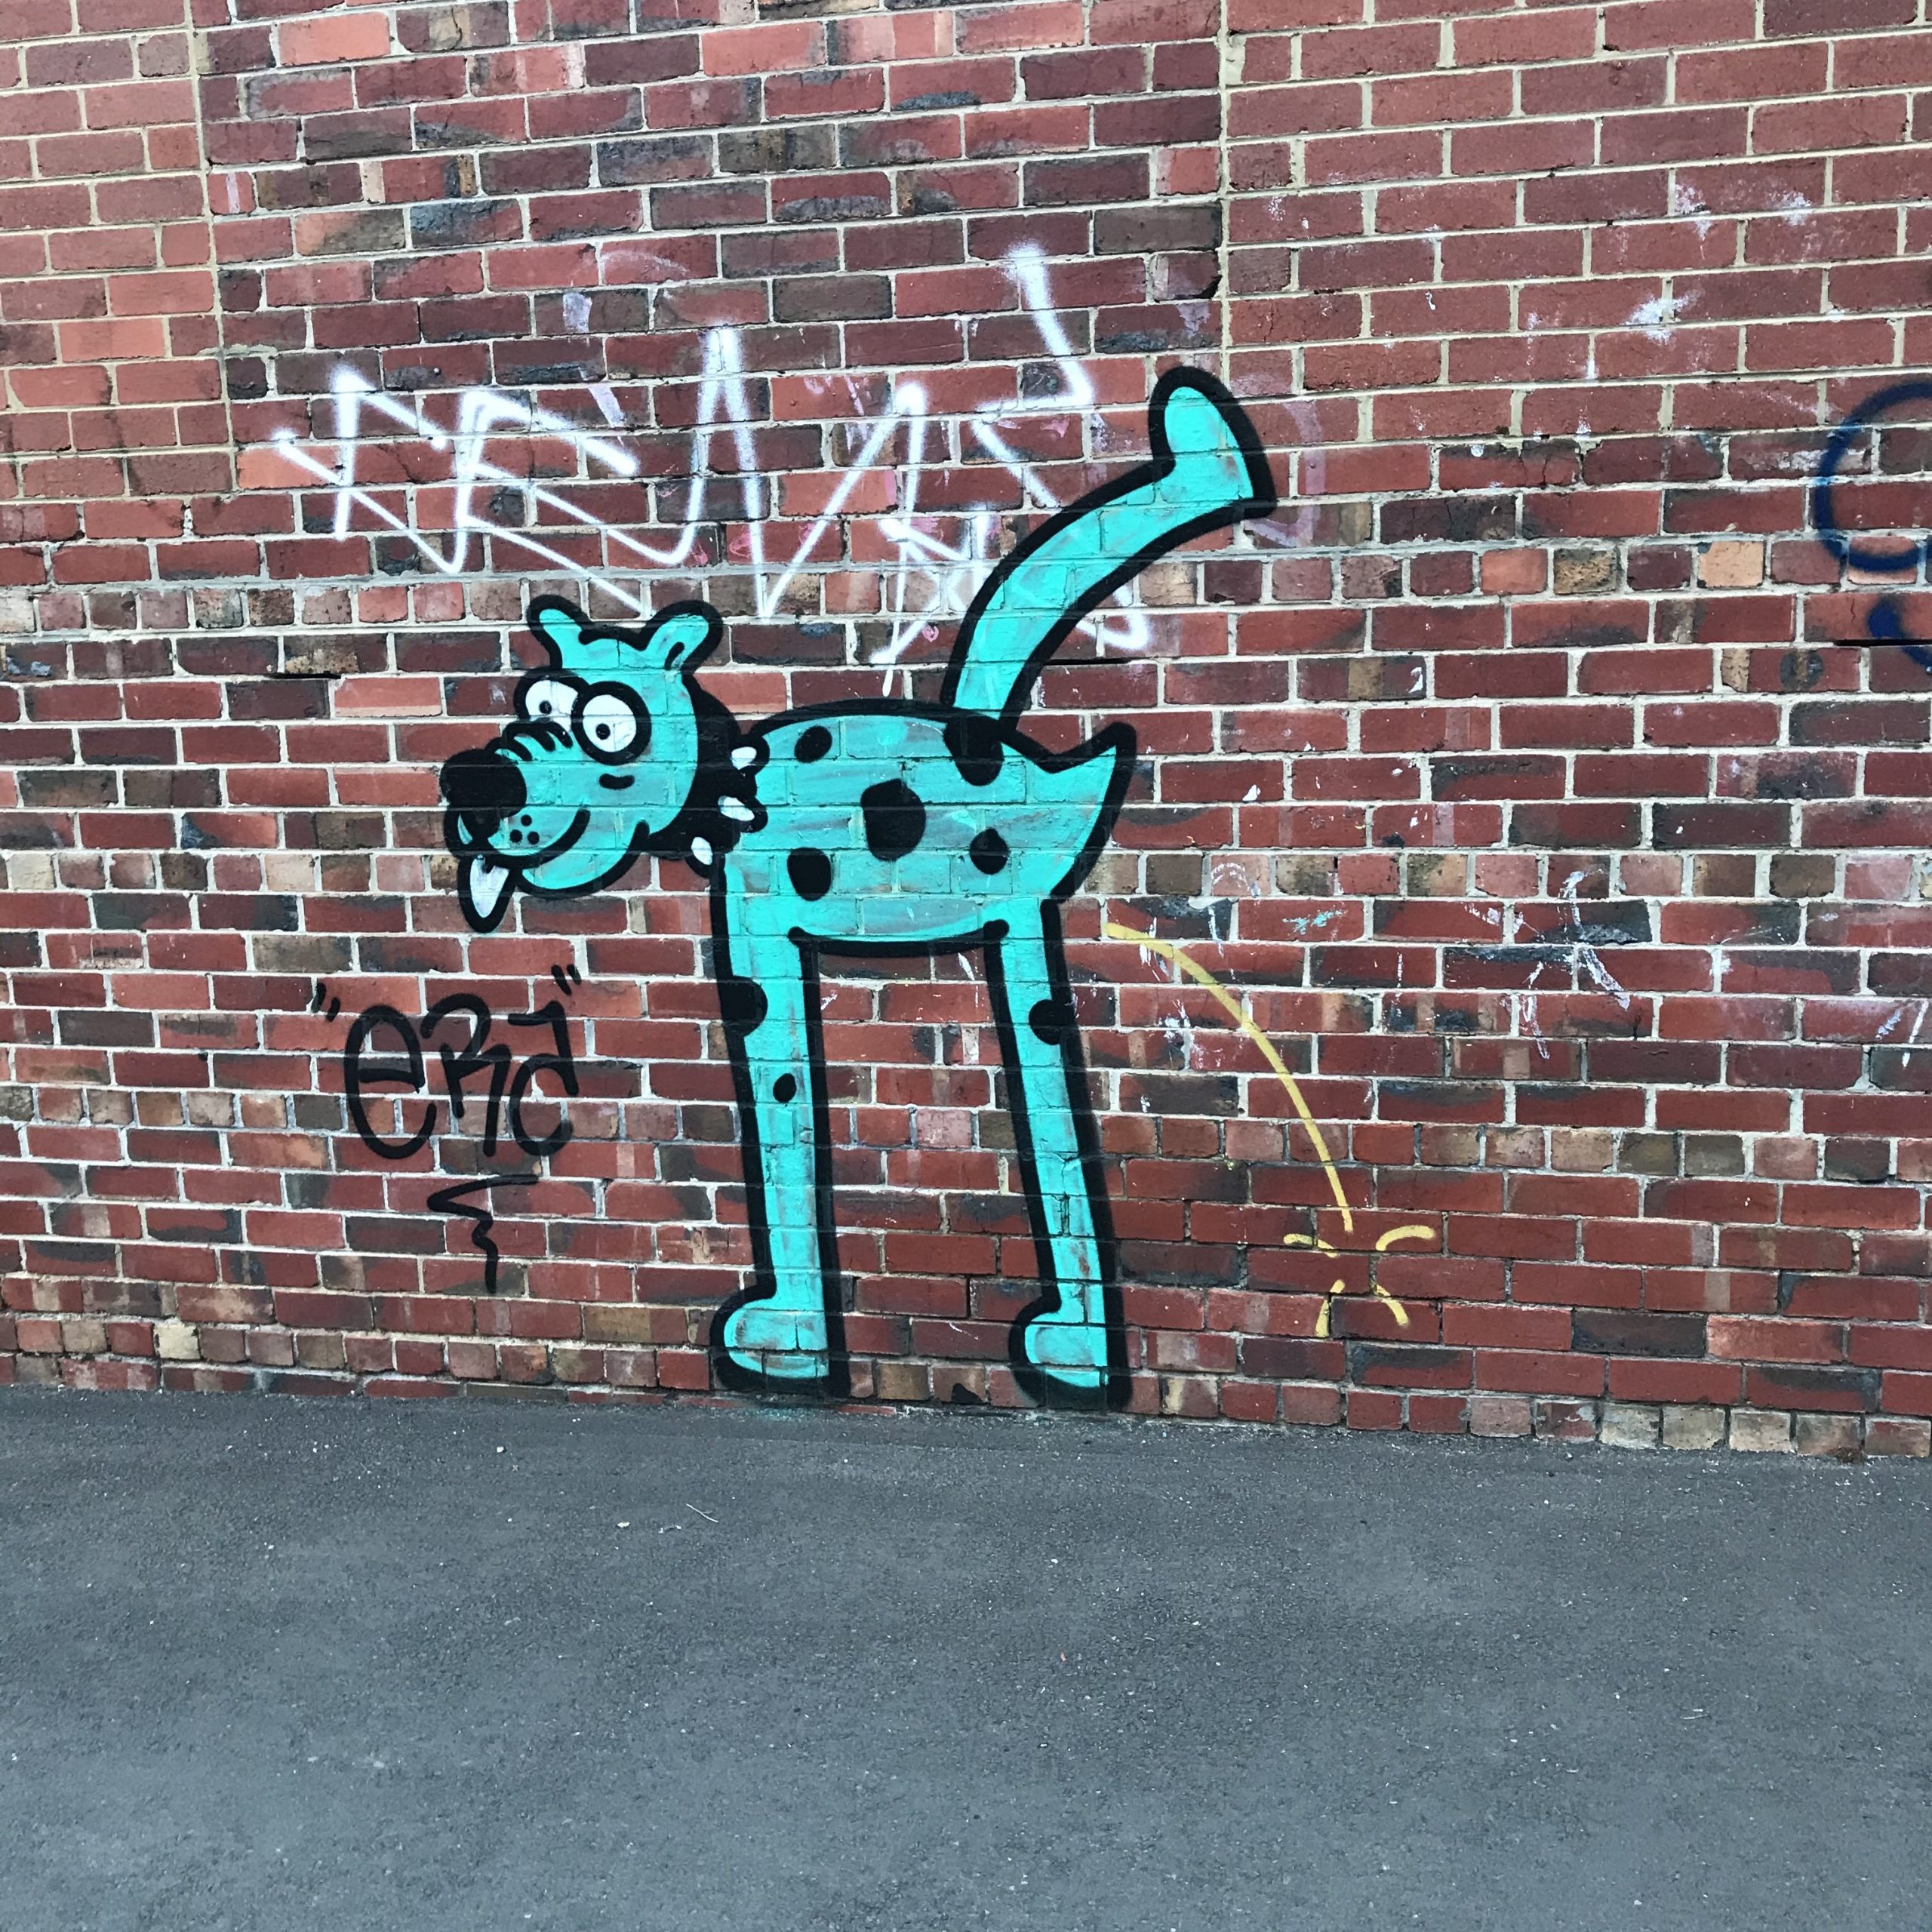 Urinating dog graffitied on an old brick wall